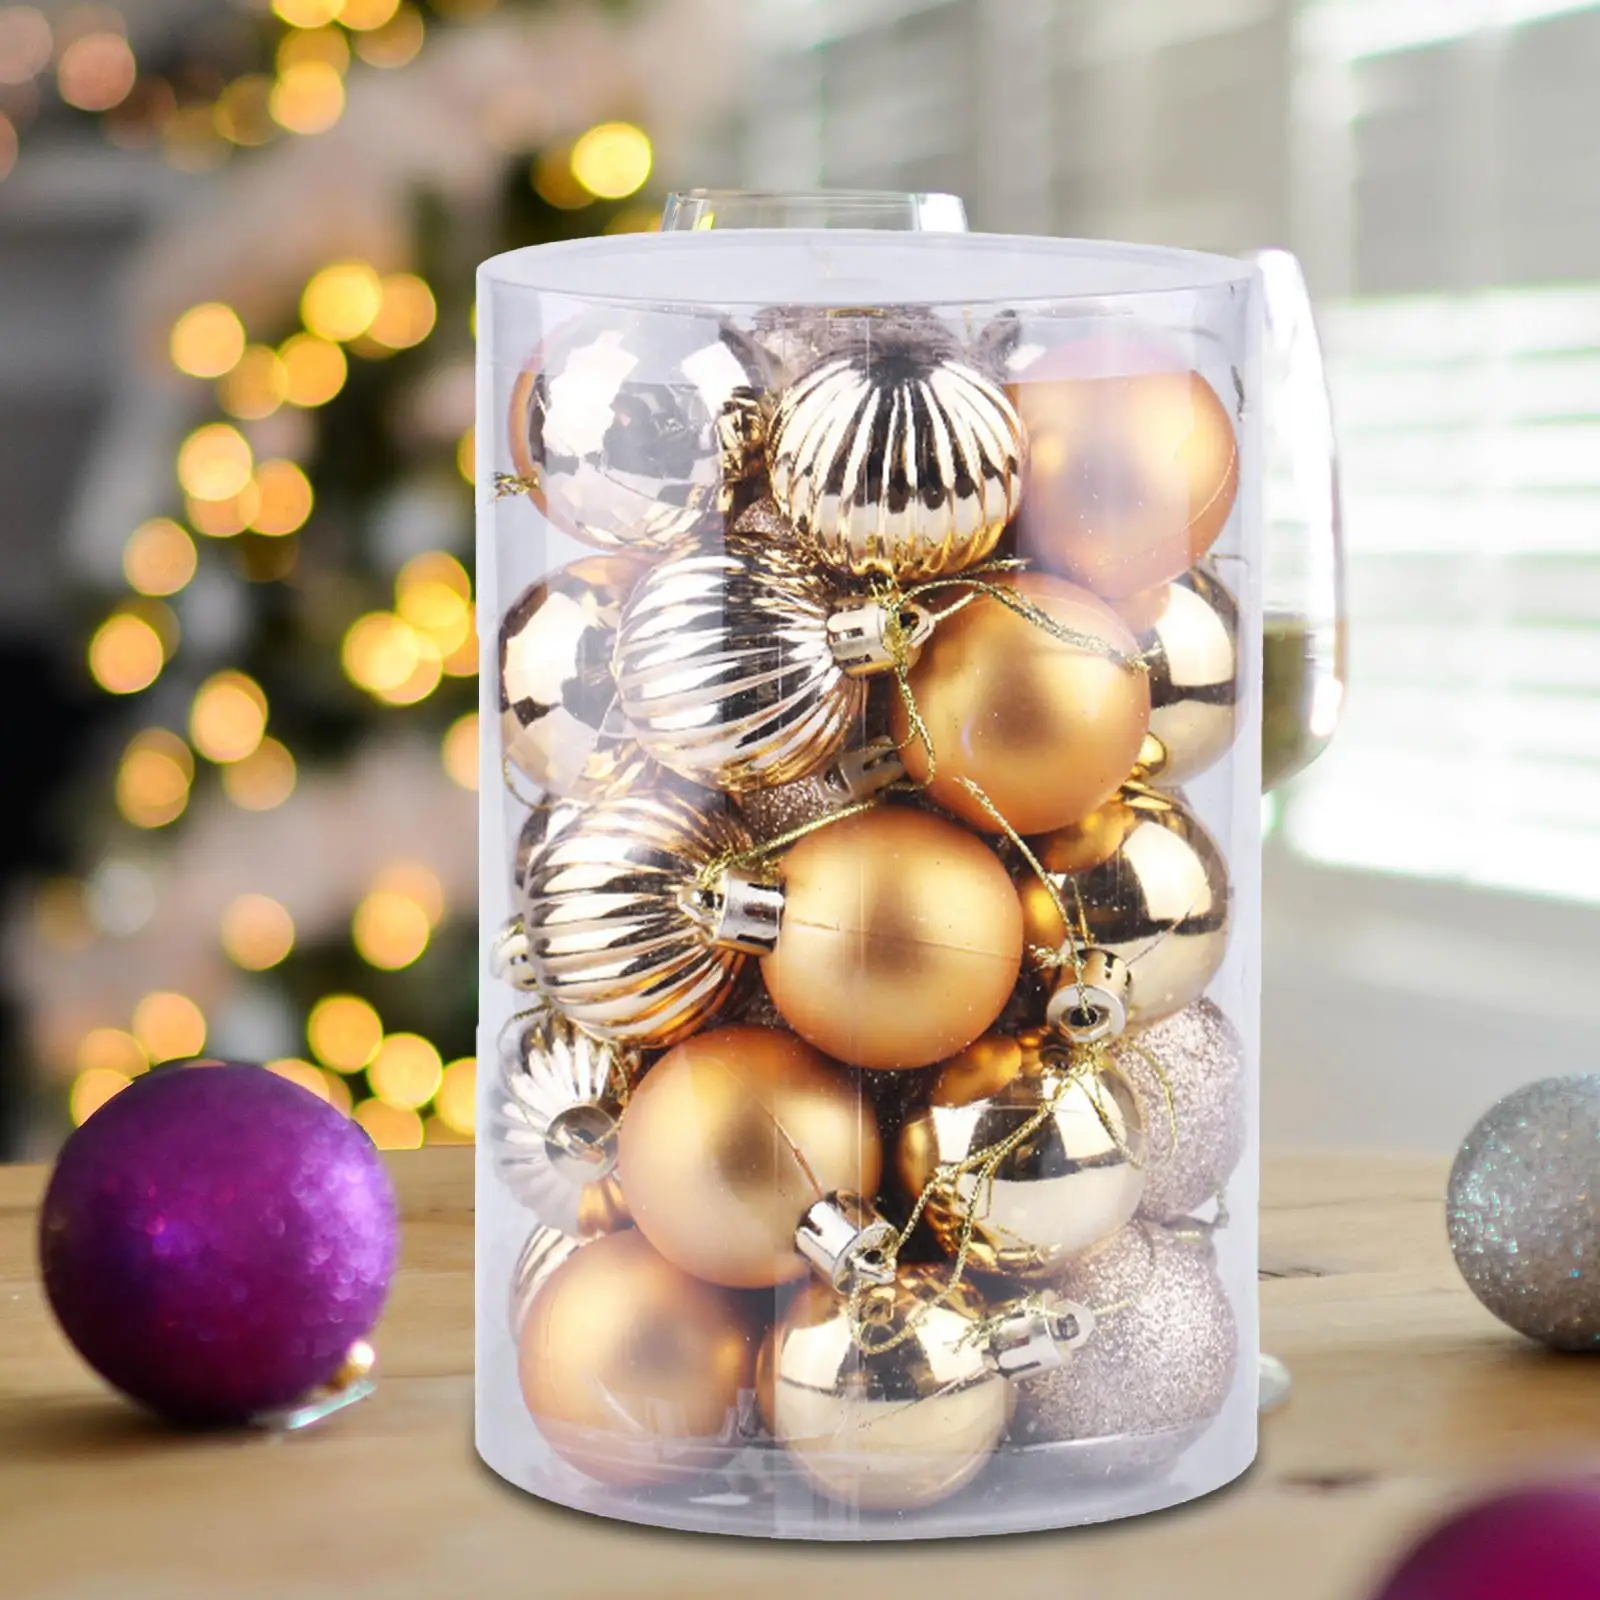 34x Shatterproof Christmas Balls Decorative Pendants Christmas Ornaments Set for Engagement Holiday New Year Indoor Party